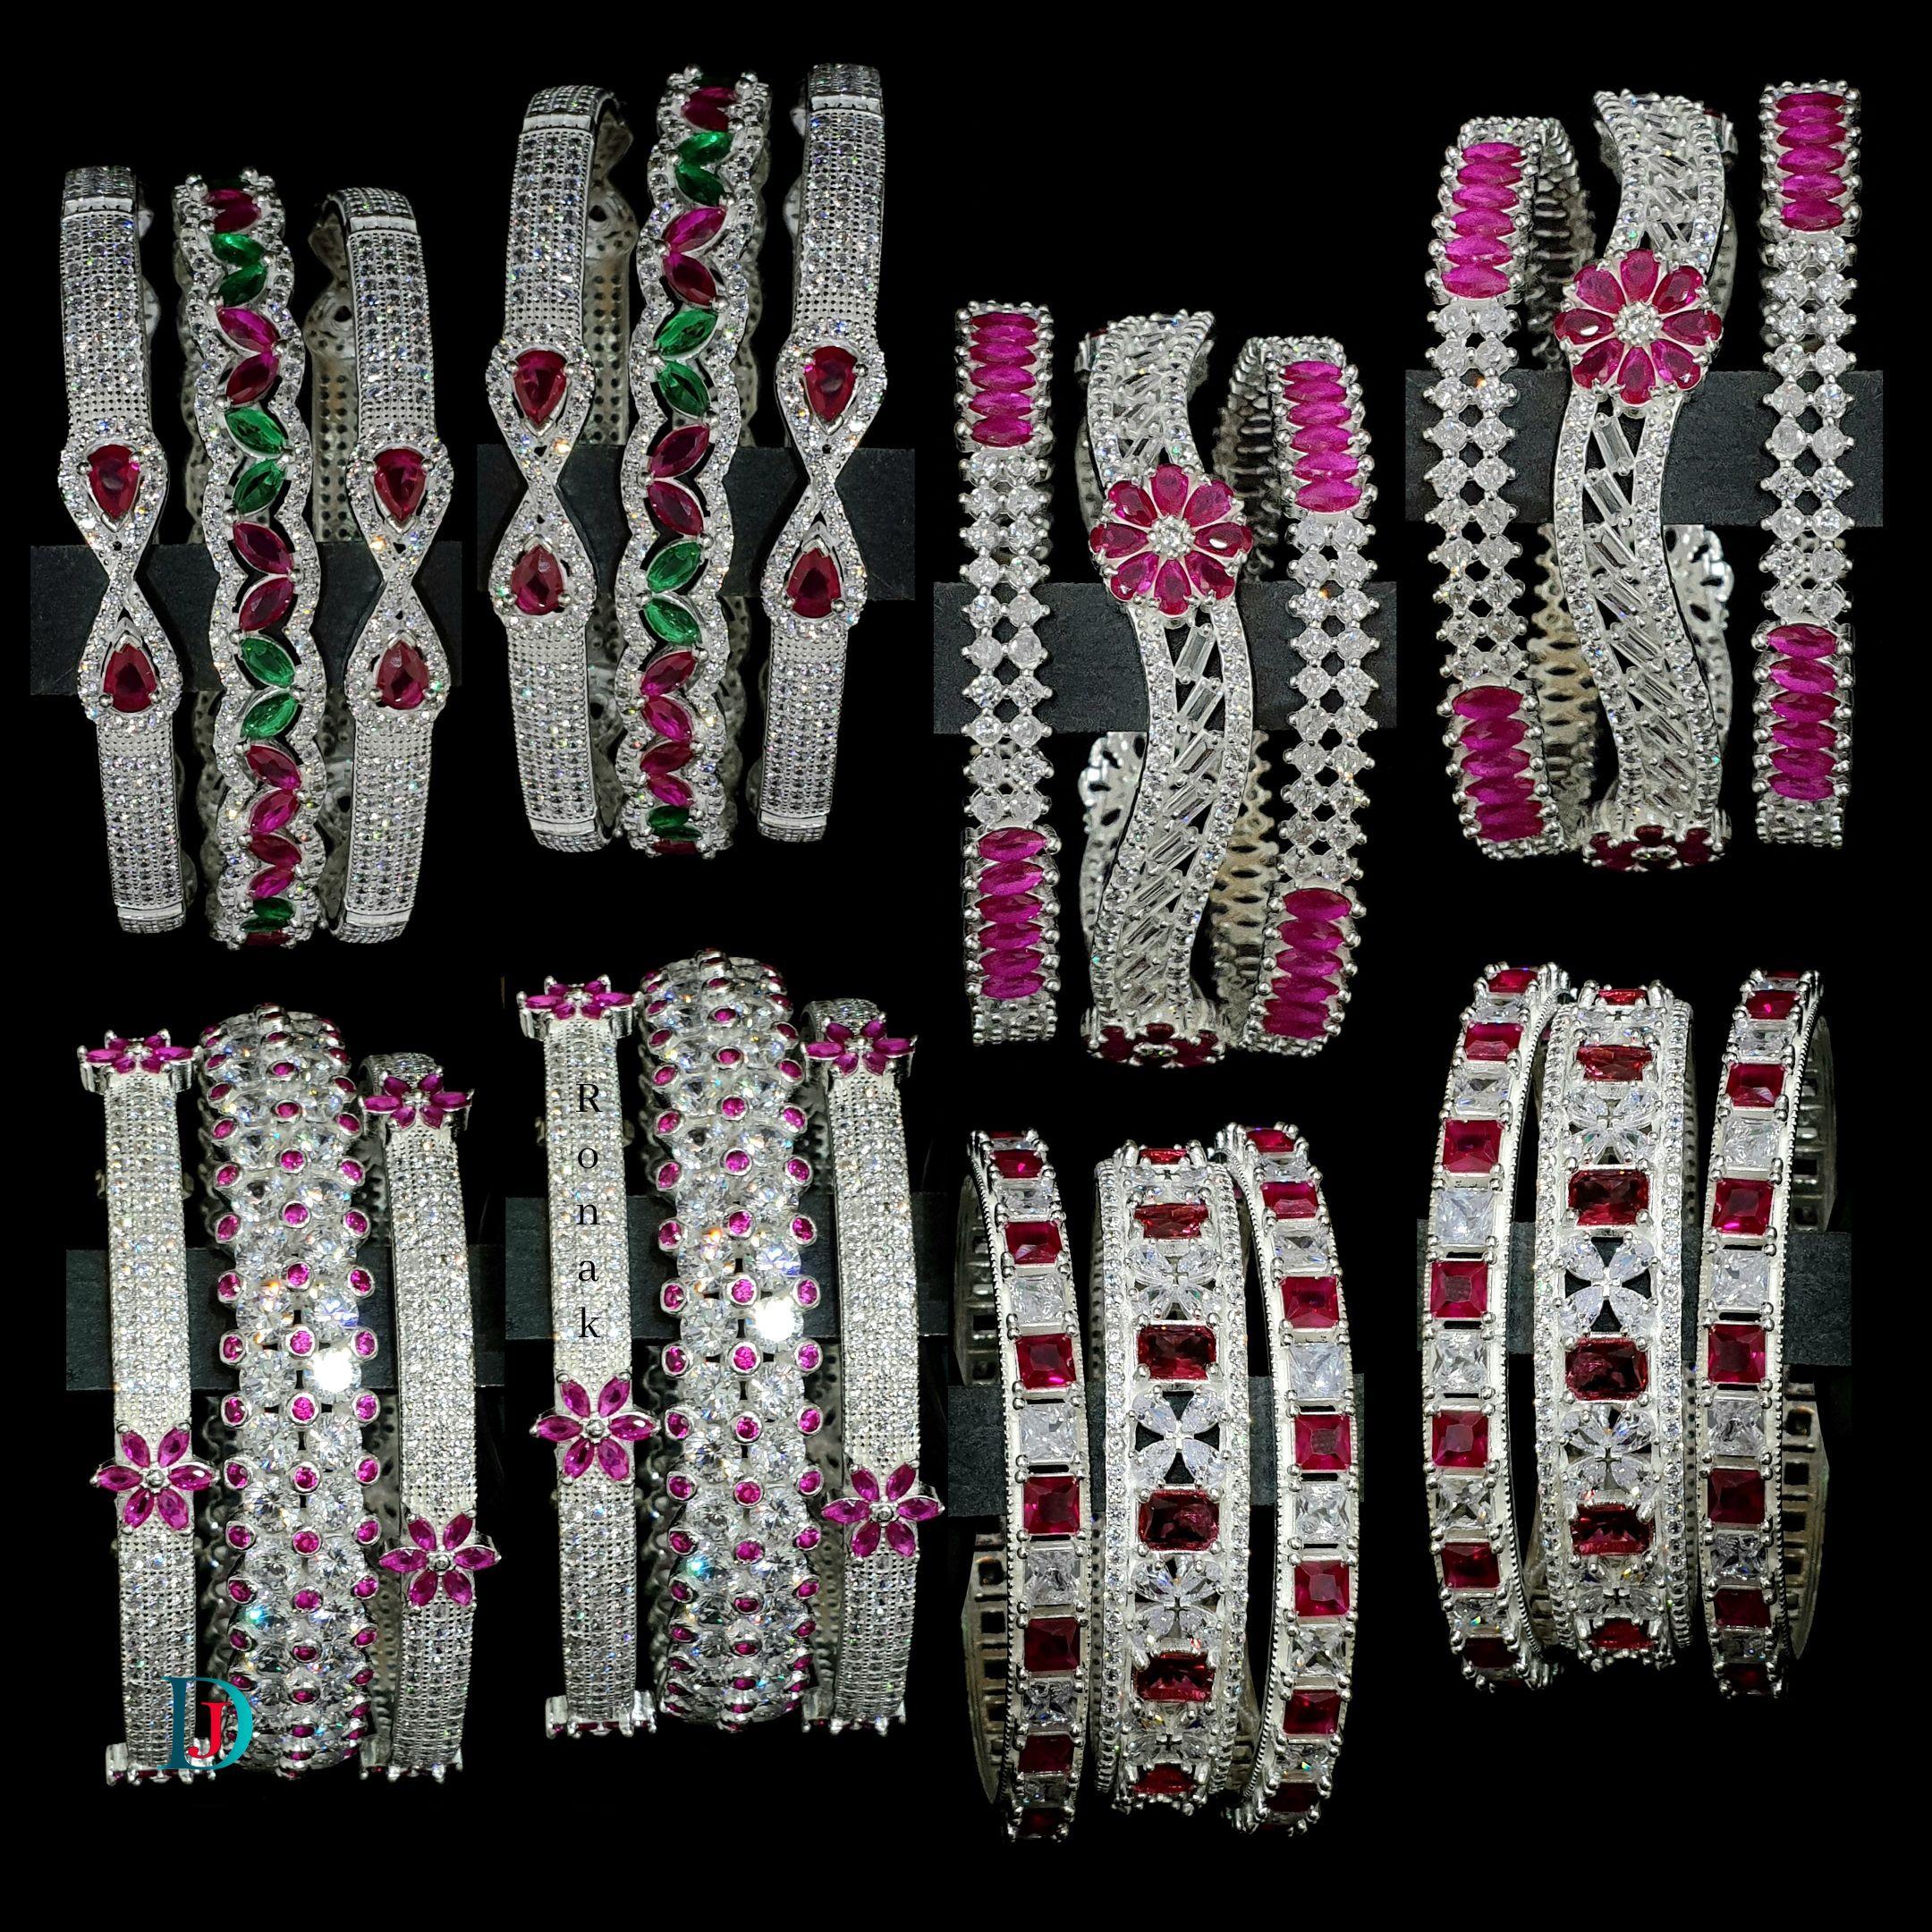 New and Latest Design of Desi Rajasthani Silver Bangles 